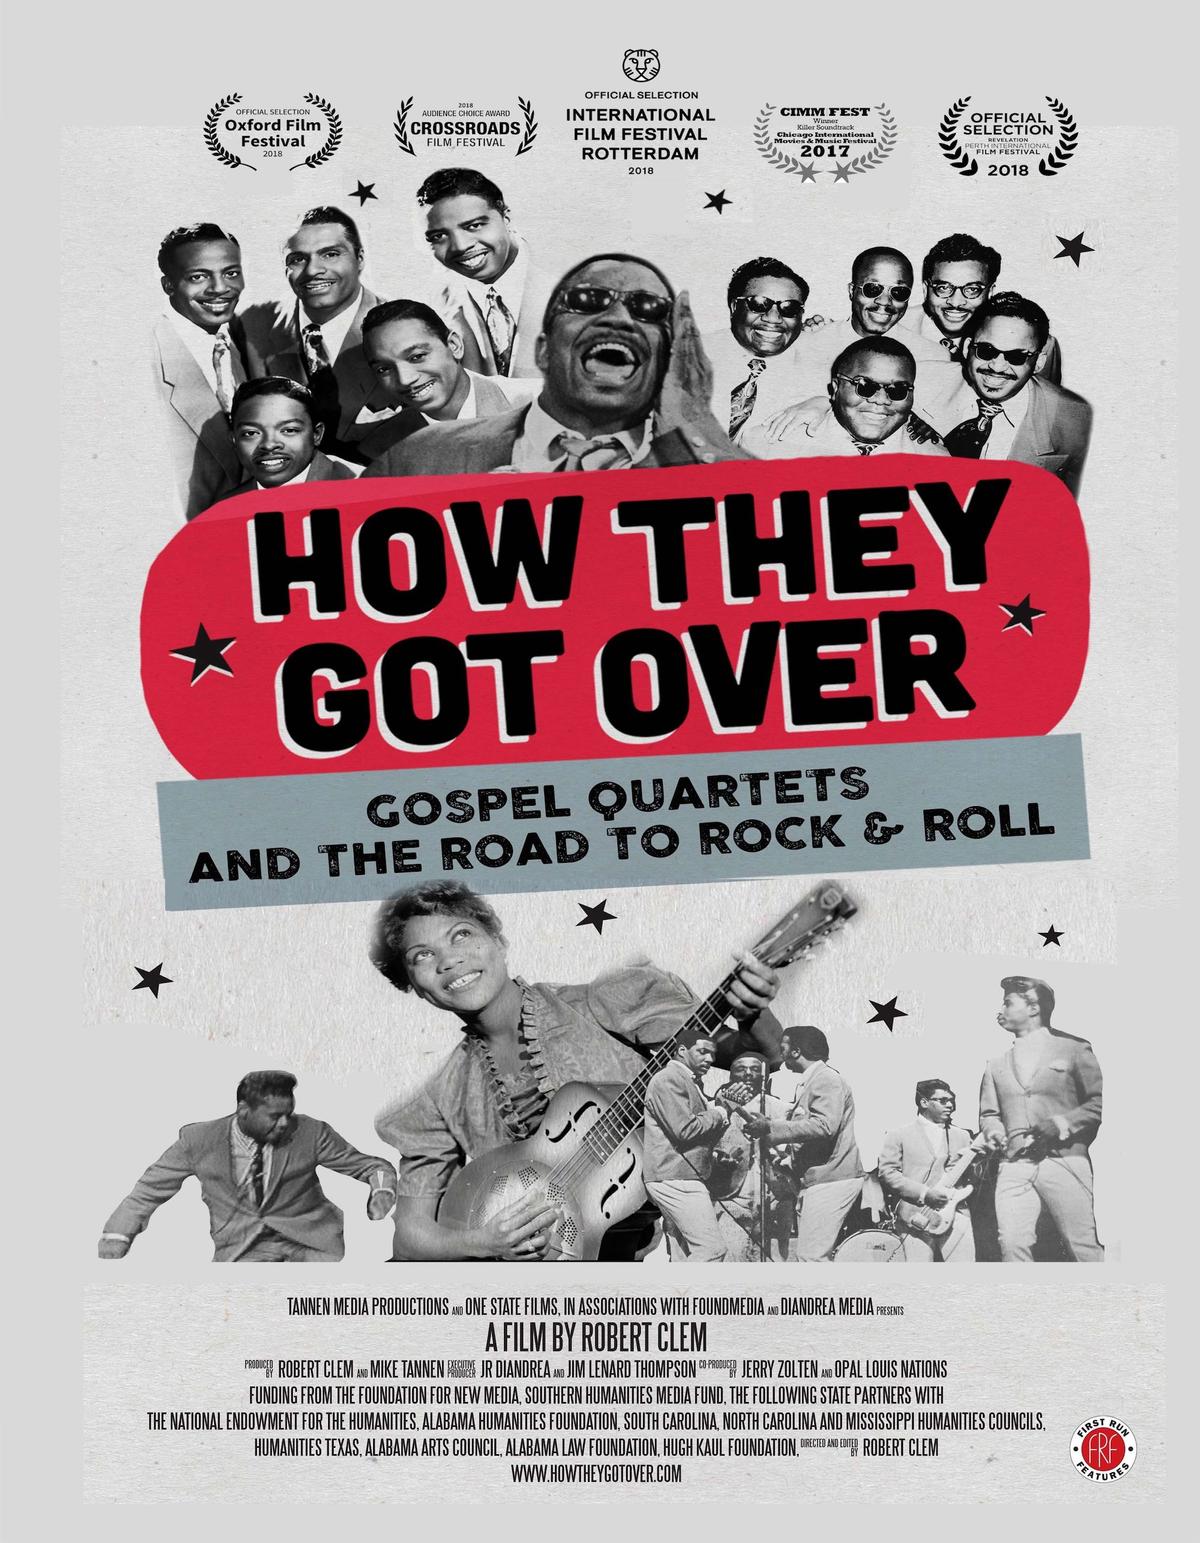 Movie poster for "How They Got Over."